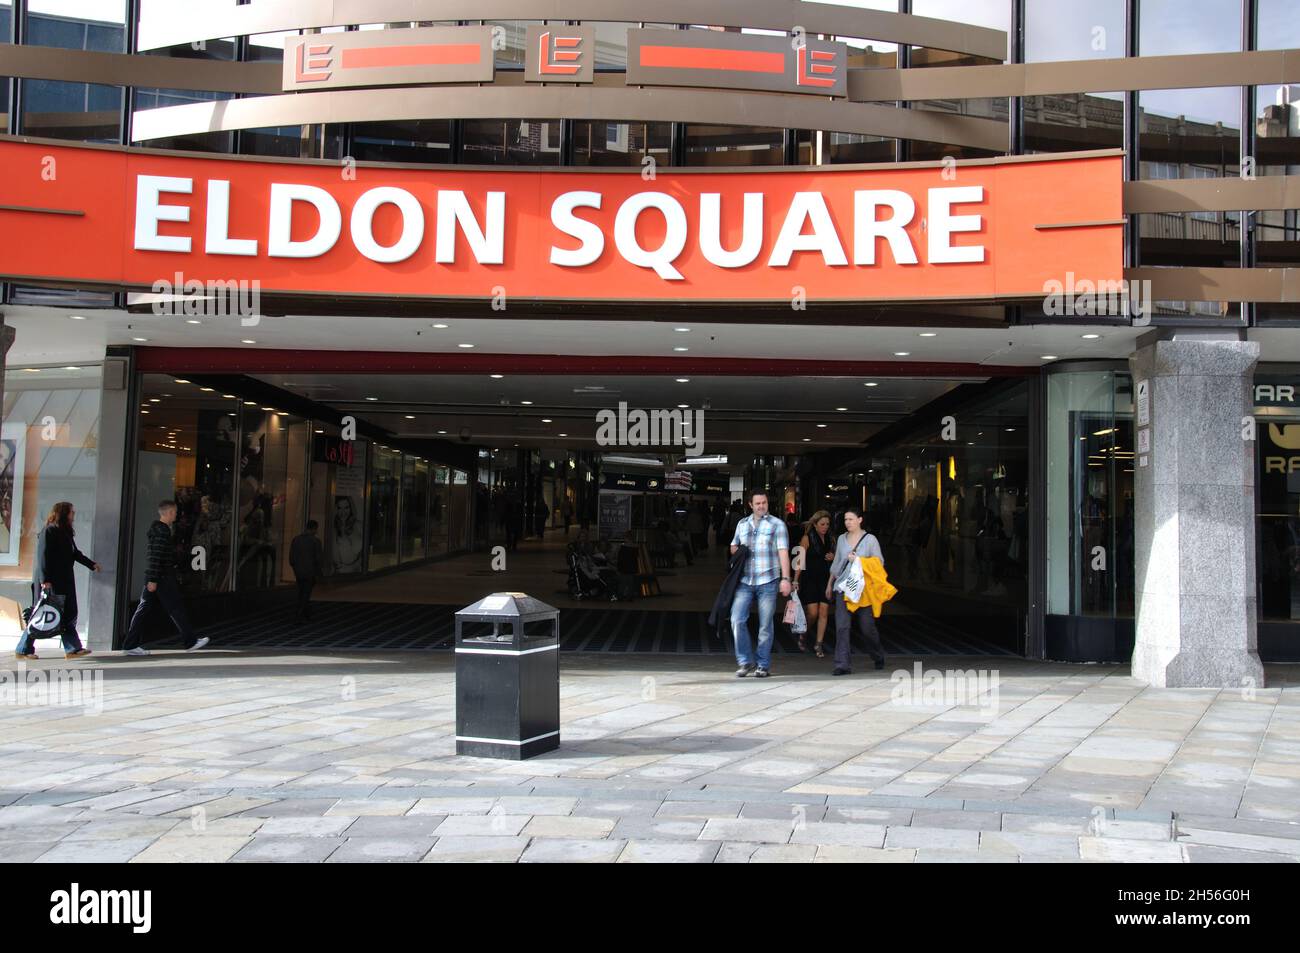 The Eldon Sqare Shopping Arcade was one of the first in the country and is very popular with visitors from Scandinavia as well as many other parts of Stock Photo